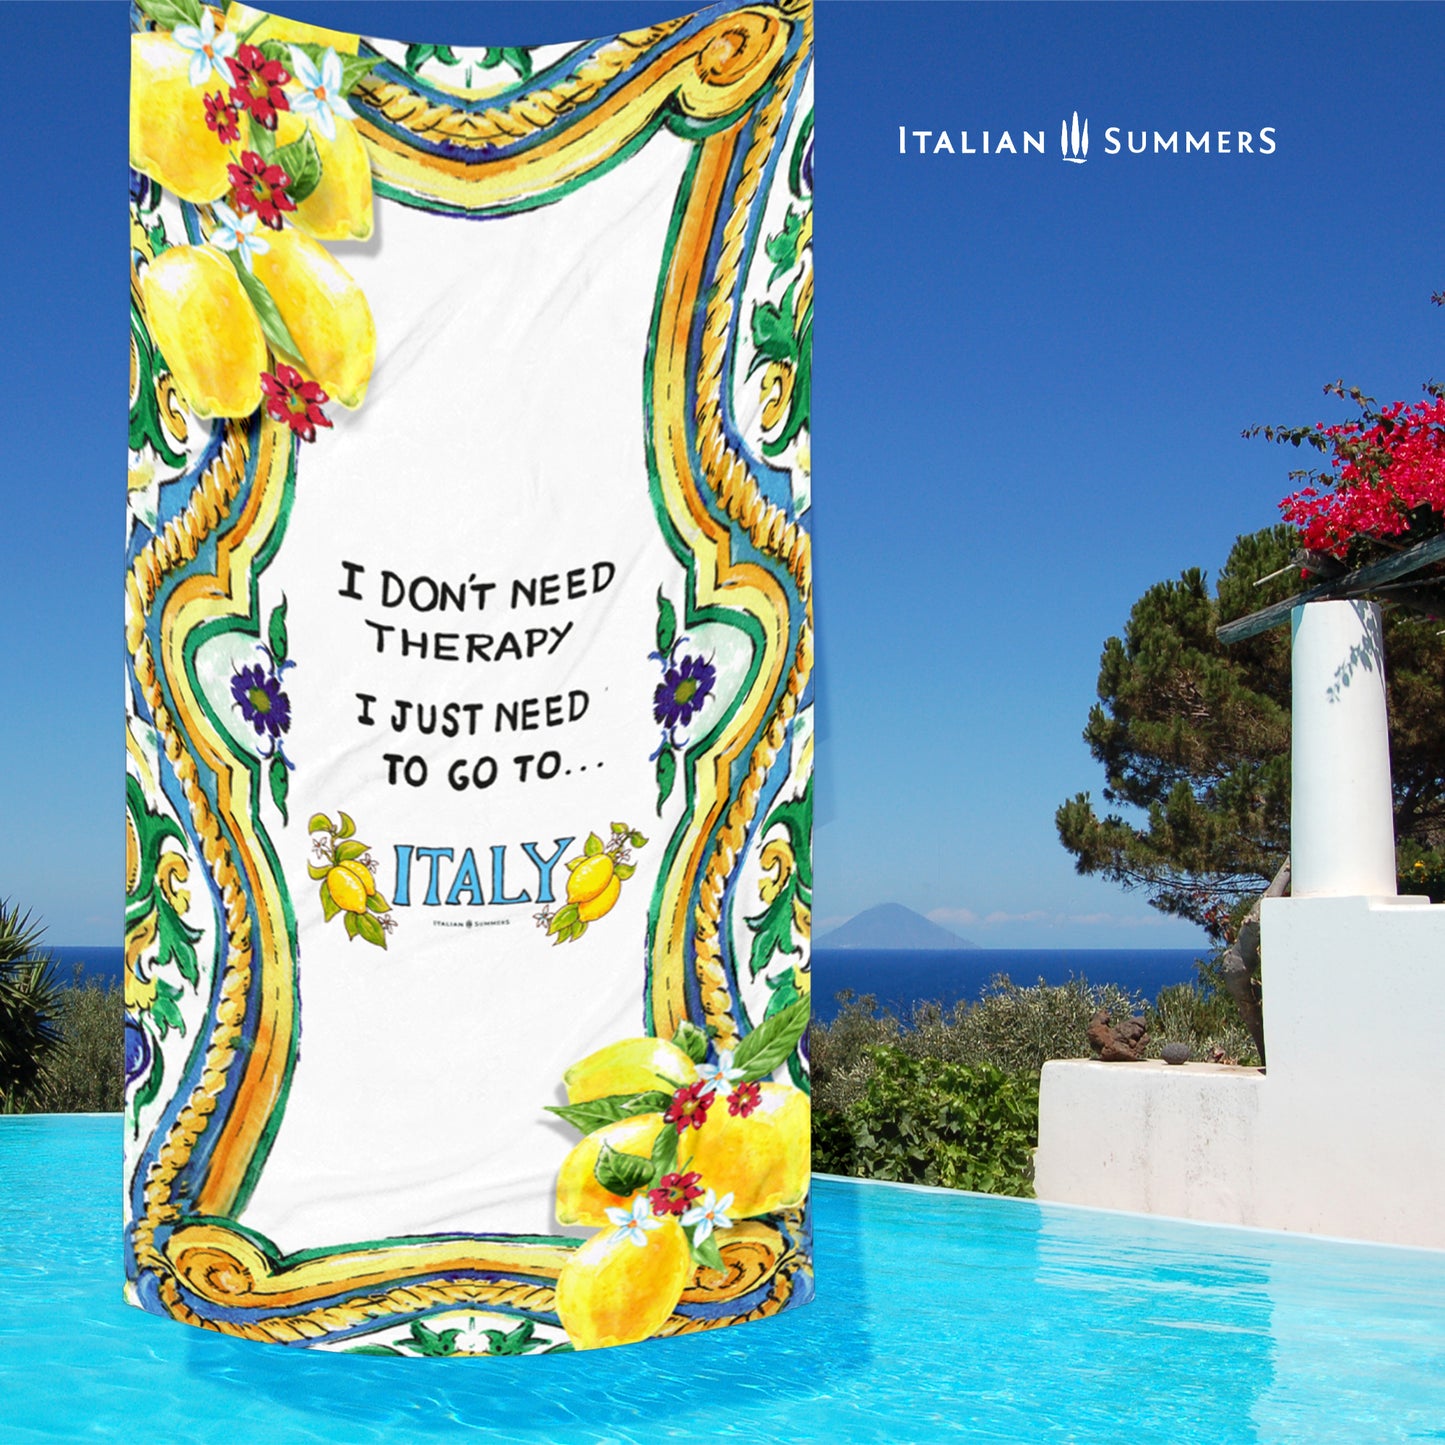 Italy inspired beach towel with a baroque Sicilian maiolica tile design  framing a field of either navy or white  with the quote " I don't need therapy I just need to go to Italy'  made by Italian Summers.